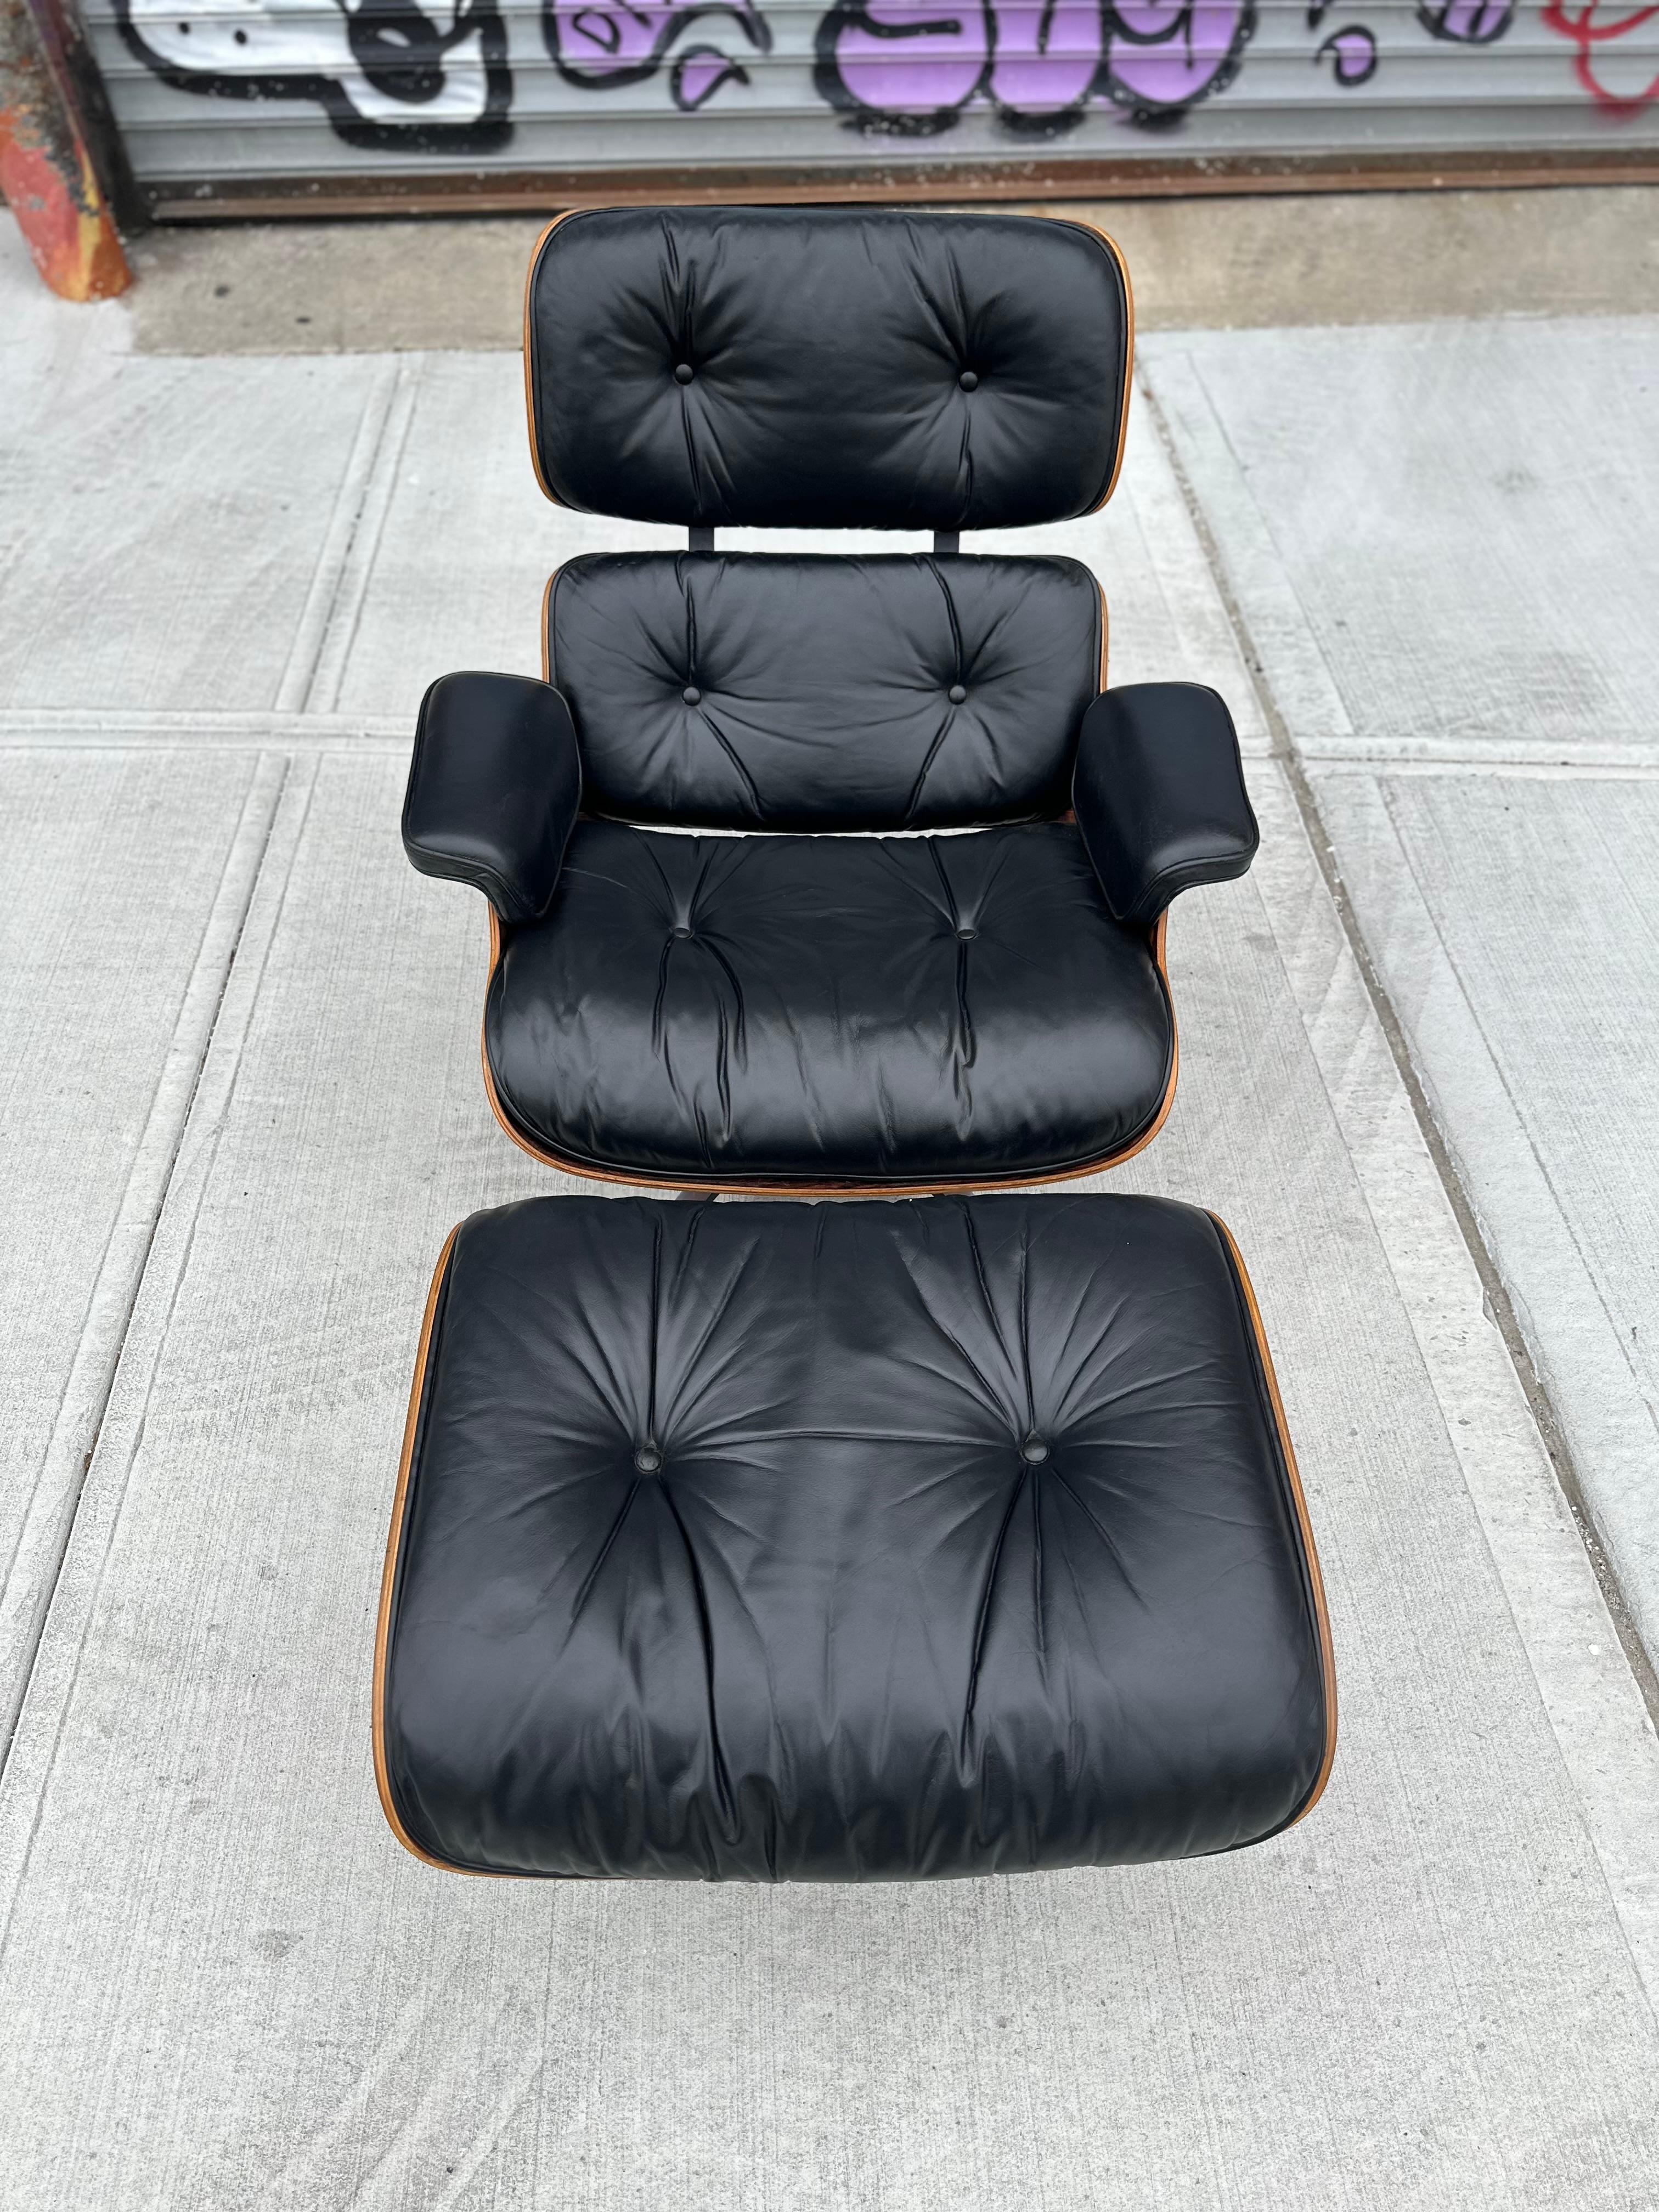 Simply stunning restored Eames lounge chair and ottoman by Herman Miller. Spectacular color and grain detail on the outer shells. Wood has been cleaned, oiled, and freshly finished in a satin lacquer. Leather has been treated, conditioned, and